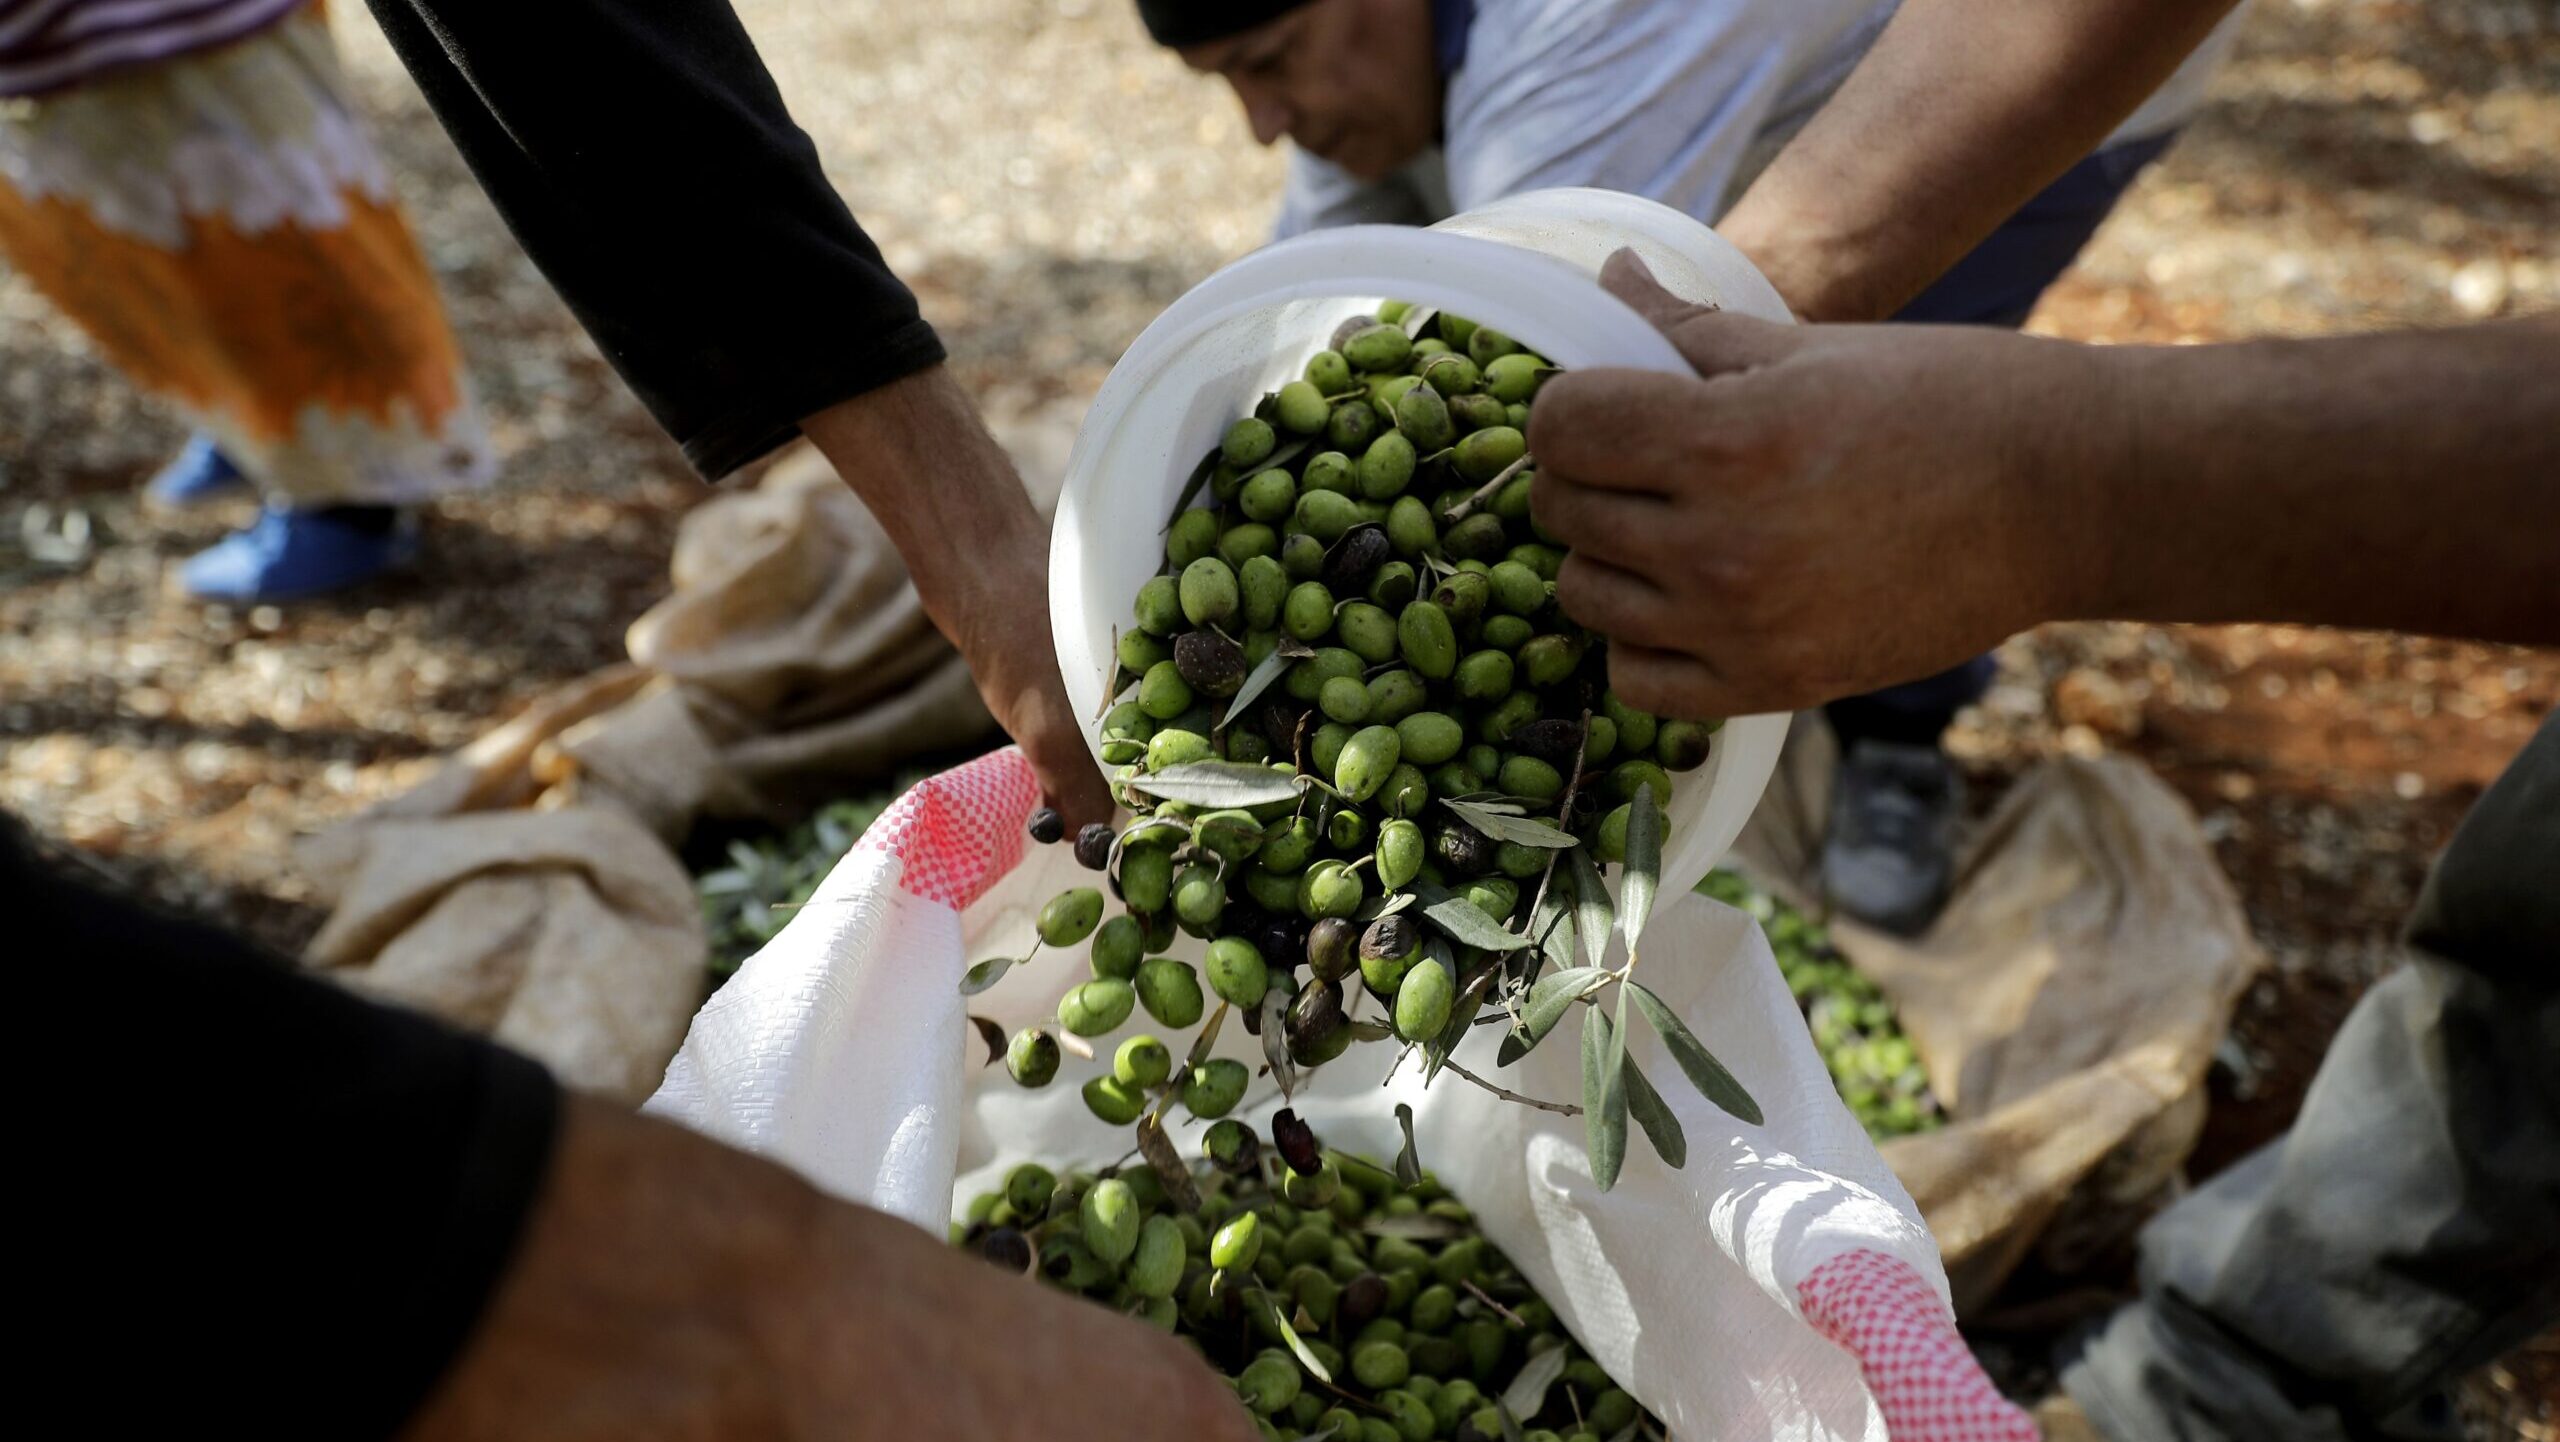 Lebanon’s Olive Farmers Caught in Crossfire of Israel-Hizbullah Conflict